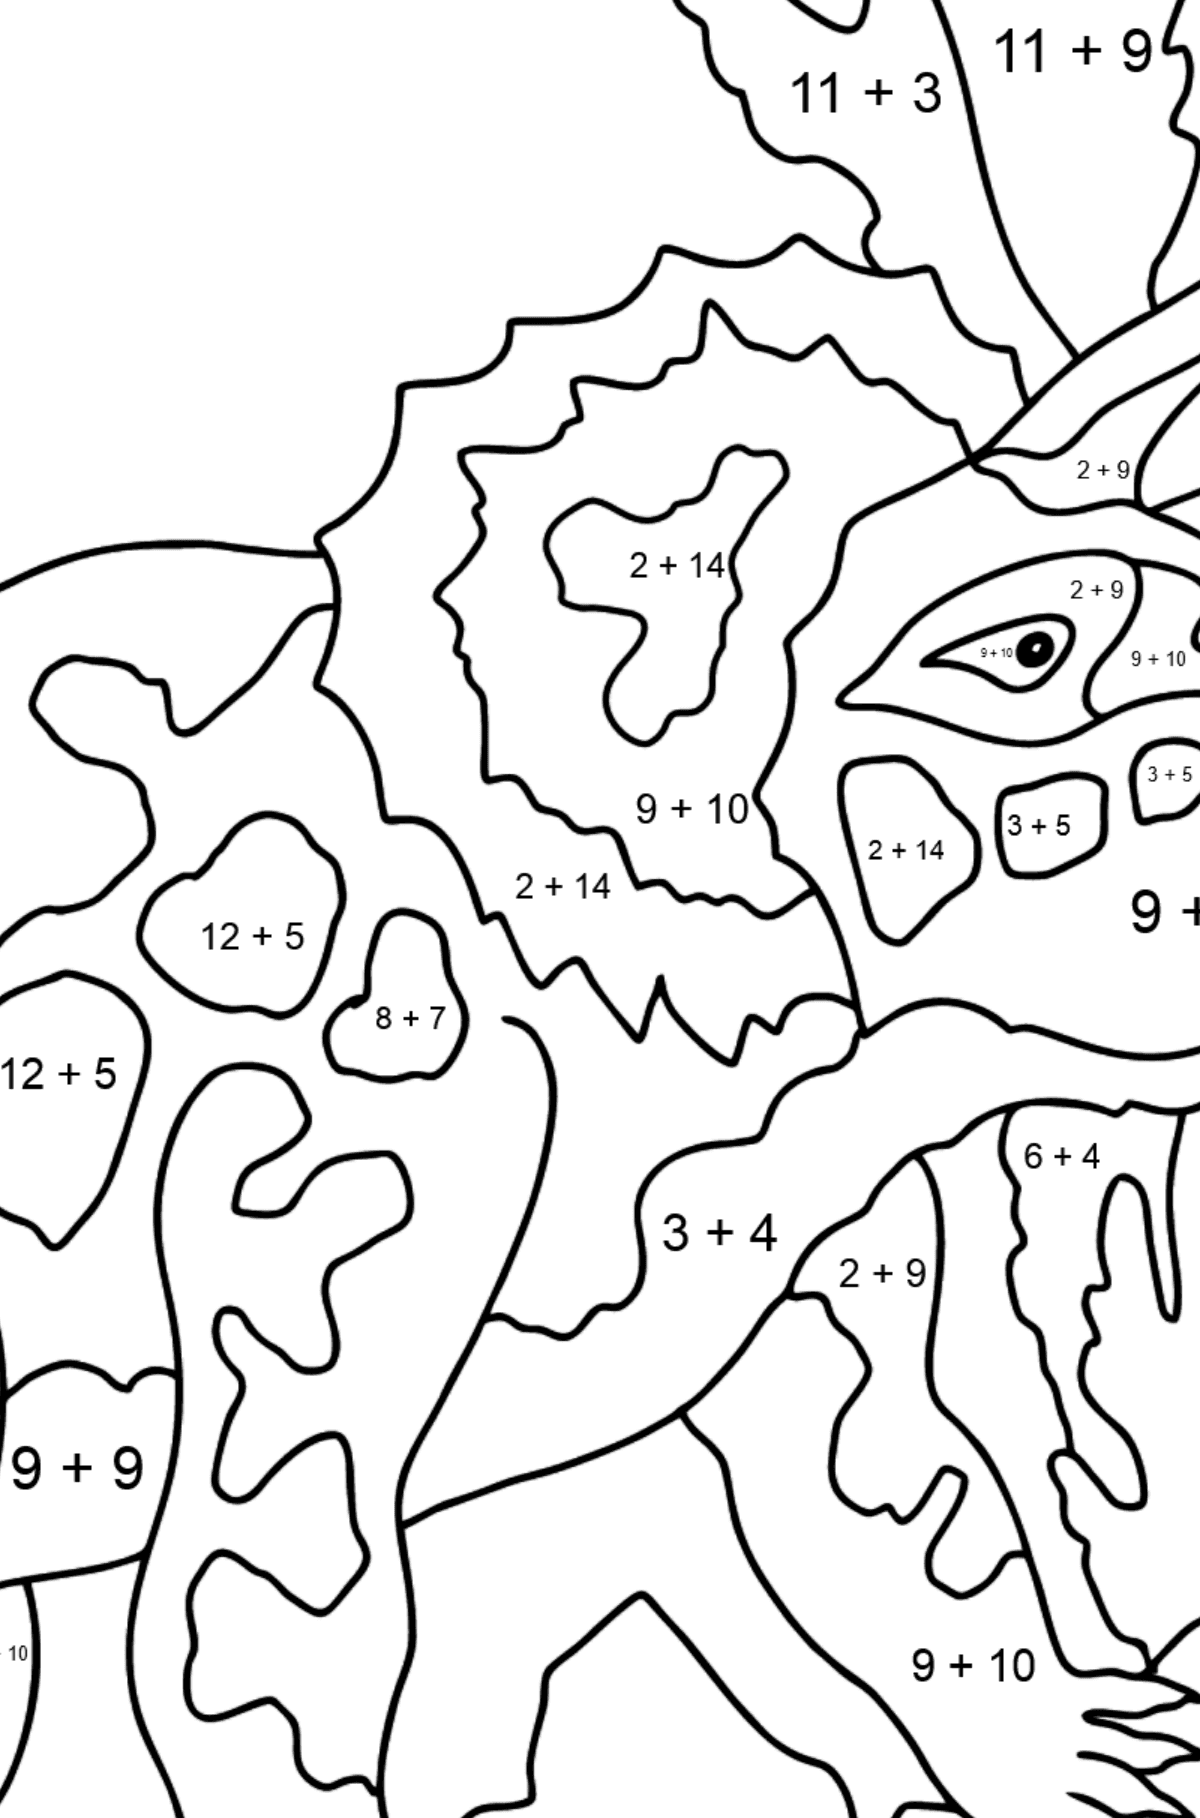 Coloring Page - Triceratops - A Grass-Eating Dinosaur - Math Coloring - Addition for Kids